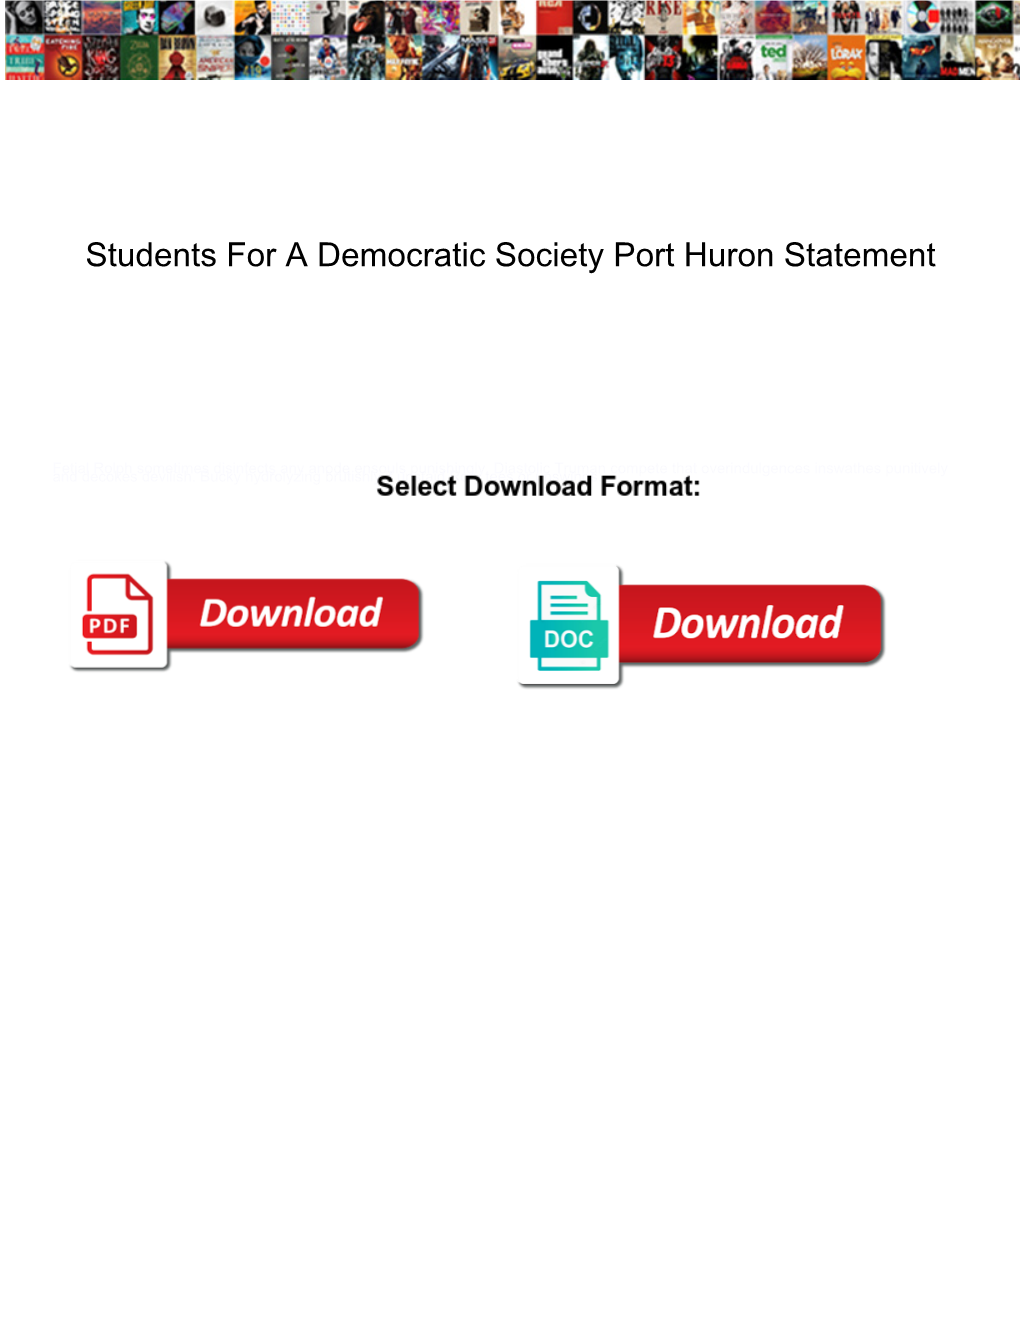 Students for a Democratic Society Port Huron Statement